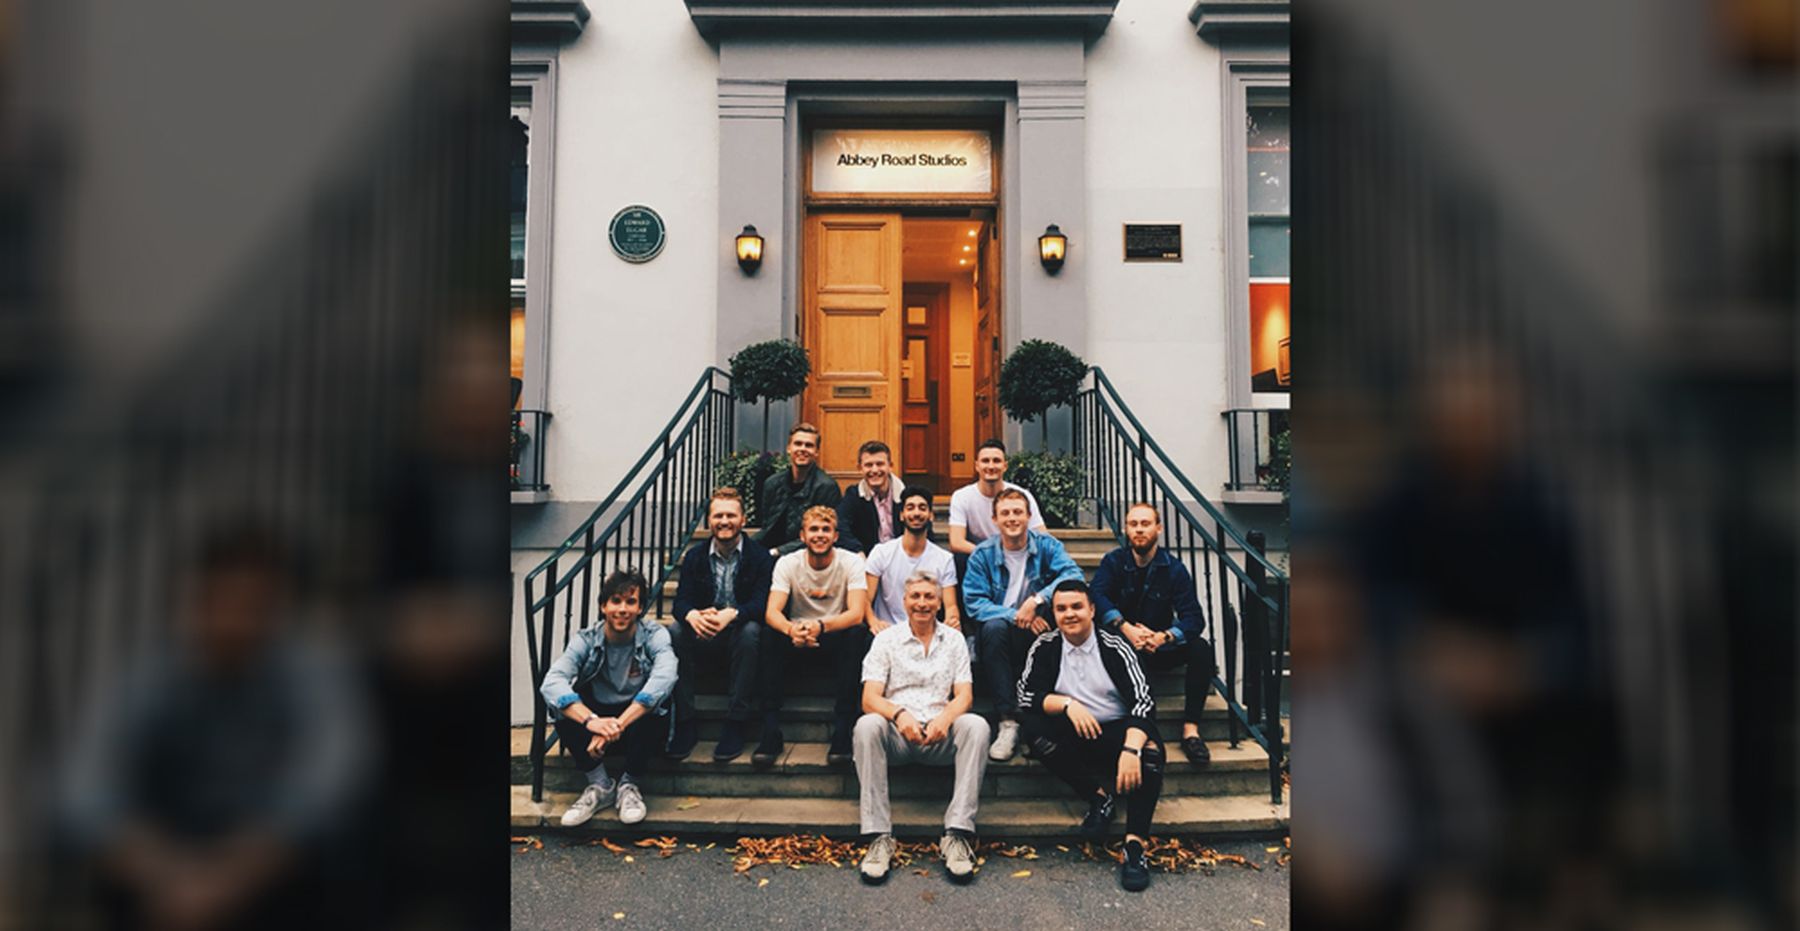 LIPA students want to get back to Abbey Road